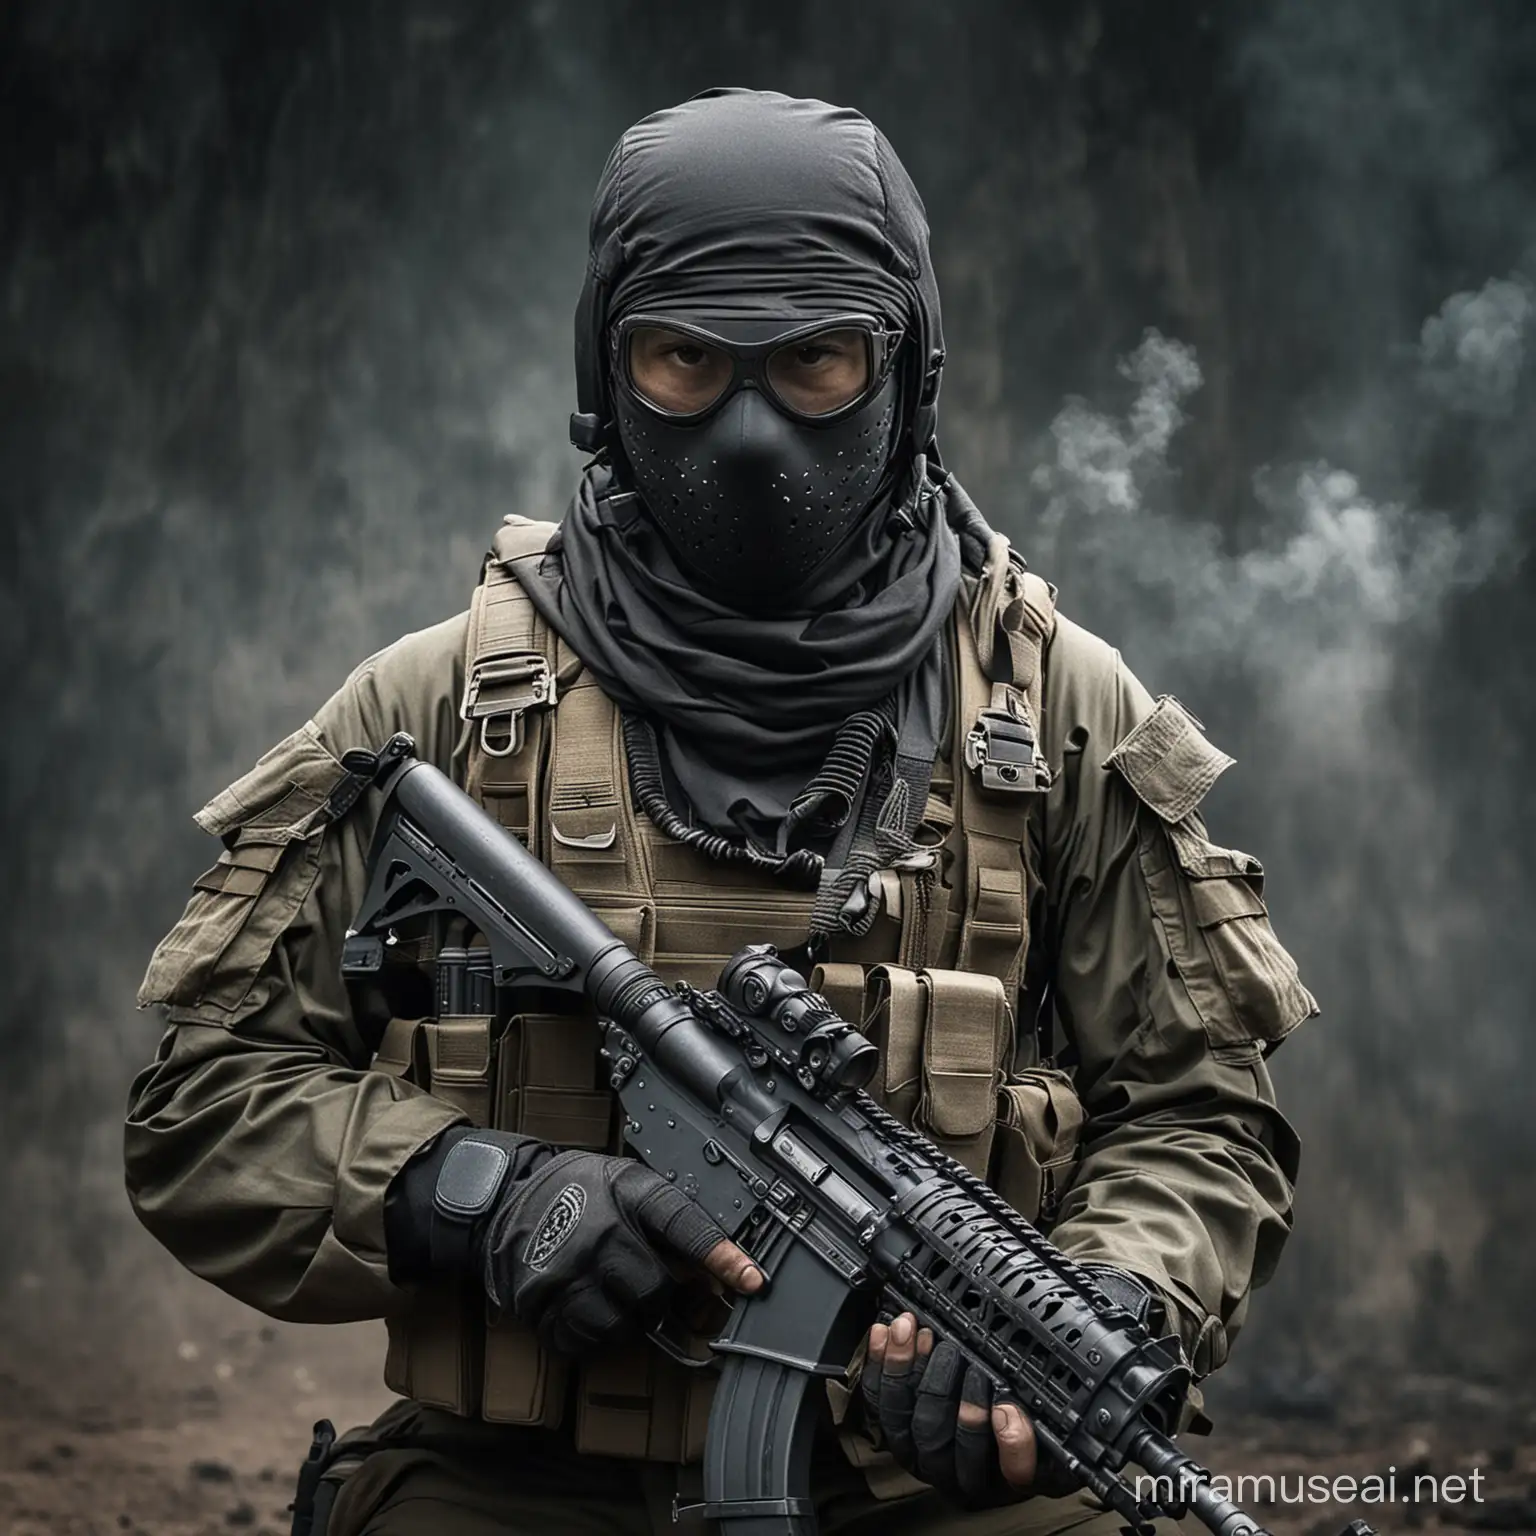 A Malaysia Komando with full tactical gear in combat, wearing tactical mask, holding heavy weapons,he looking Dangerous